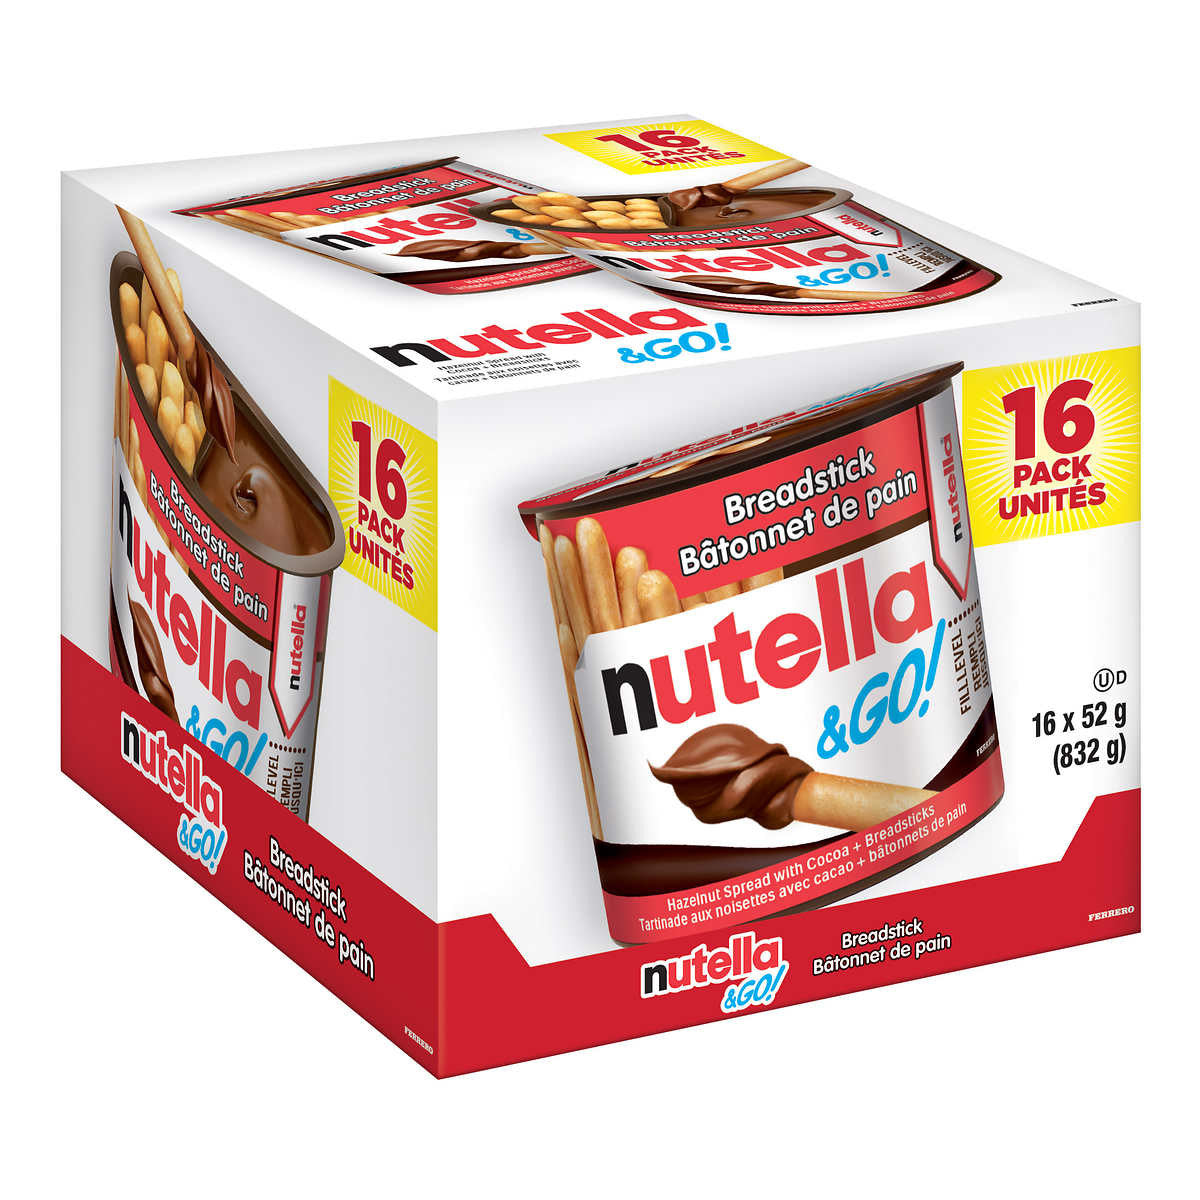 Nutella & Go Snack Packs, Chocolate Hazelnut Spread with Breadsticks, 16ct, 52g/1.8 oz per pack, {Imported from Canada}